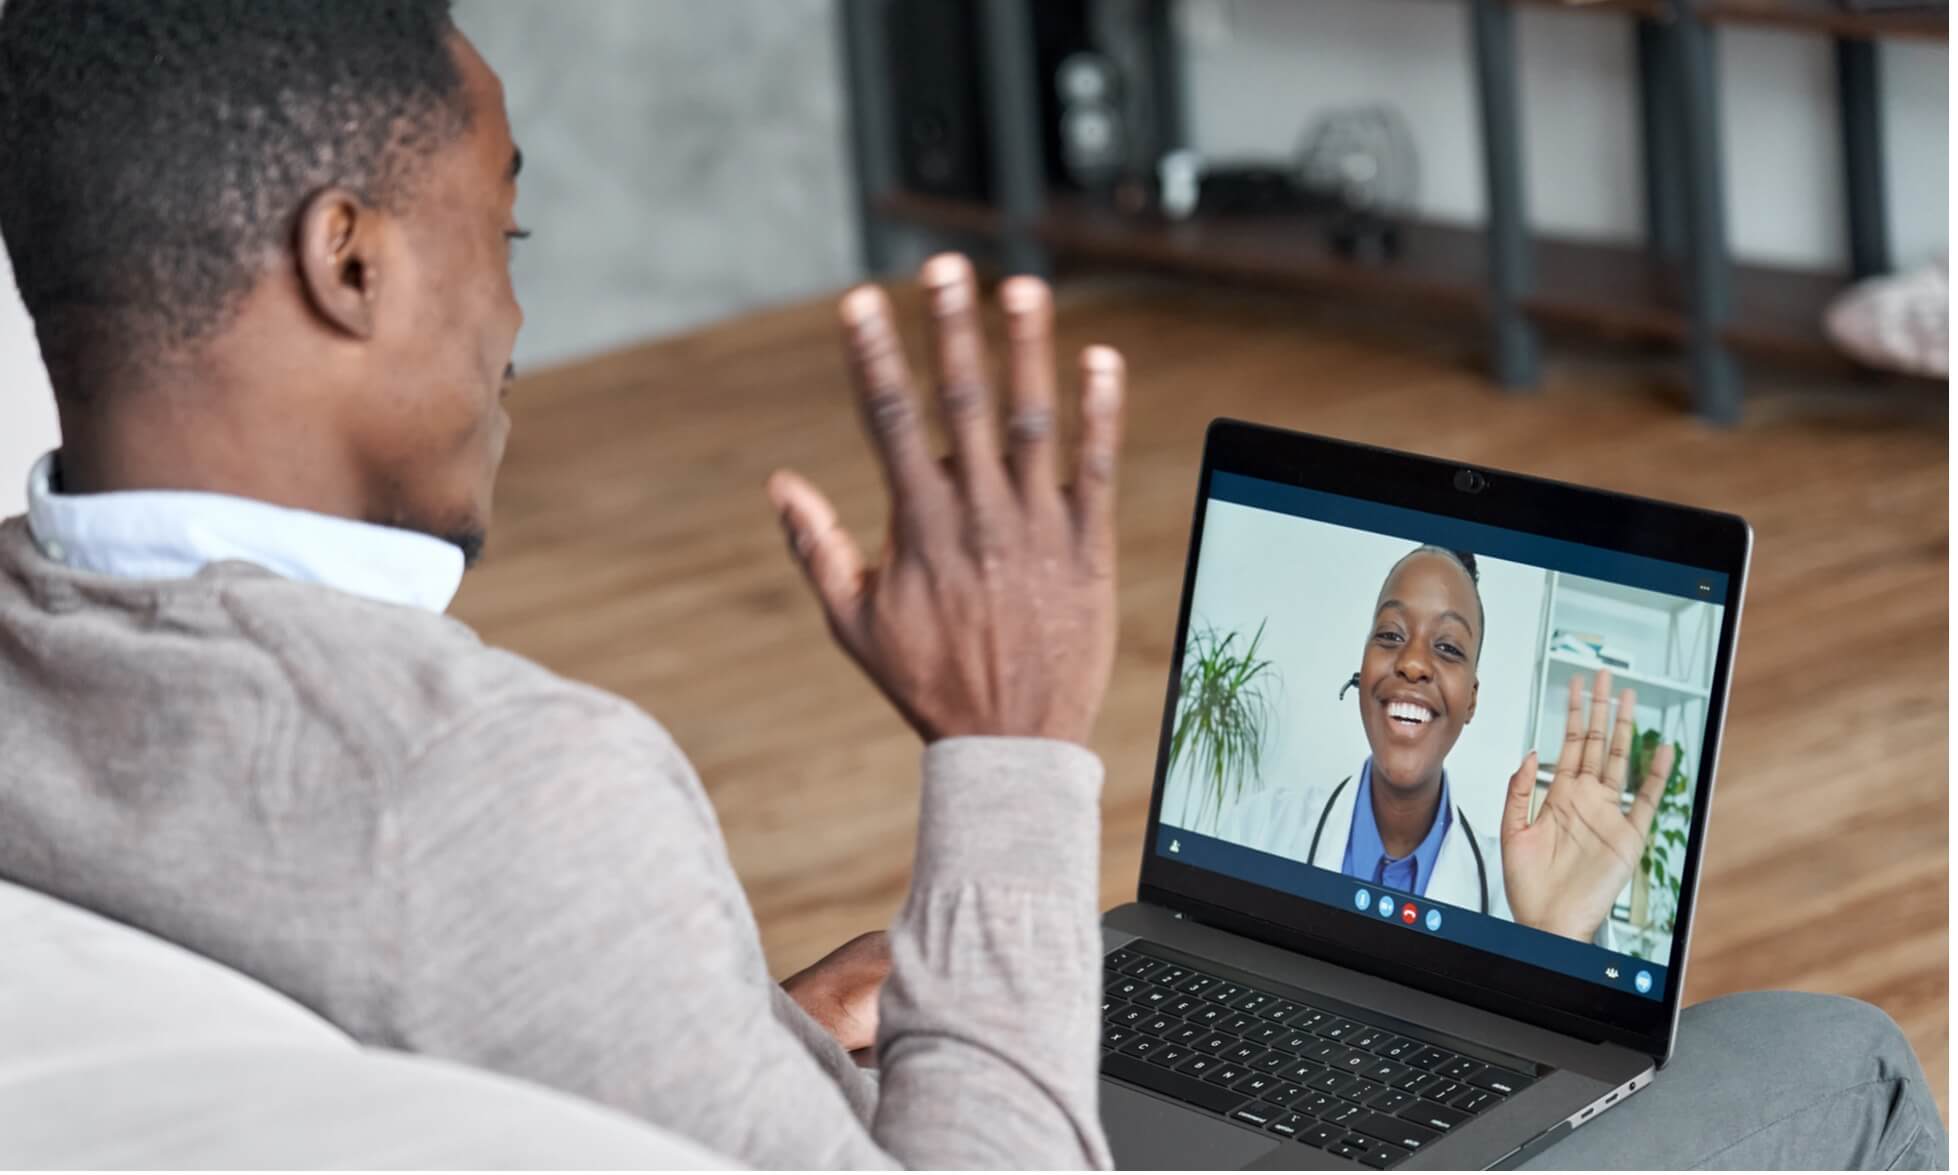 Sign In, Sit Back And Relax: Your Telehealth Visit Will Begin Soon